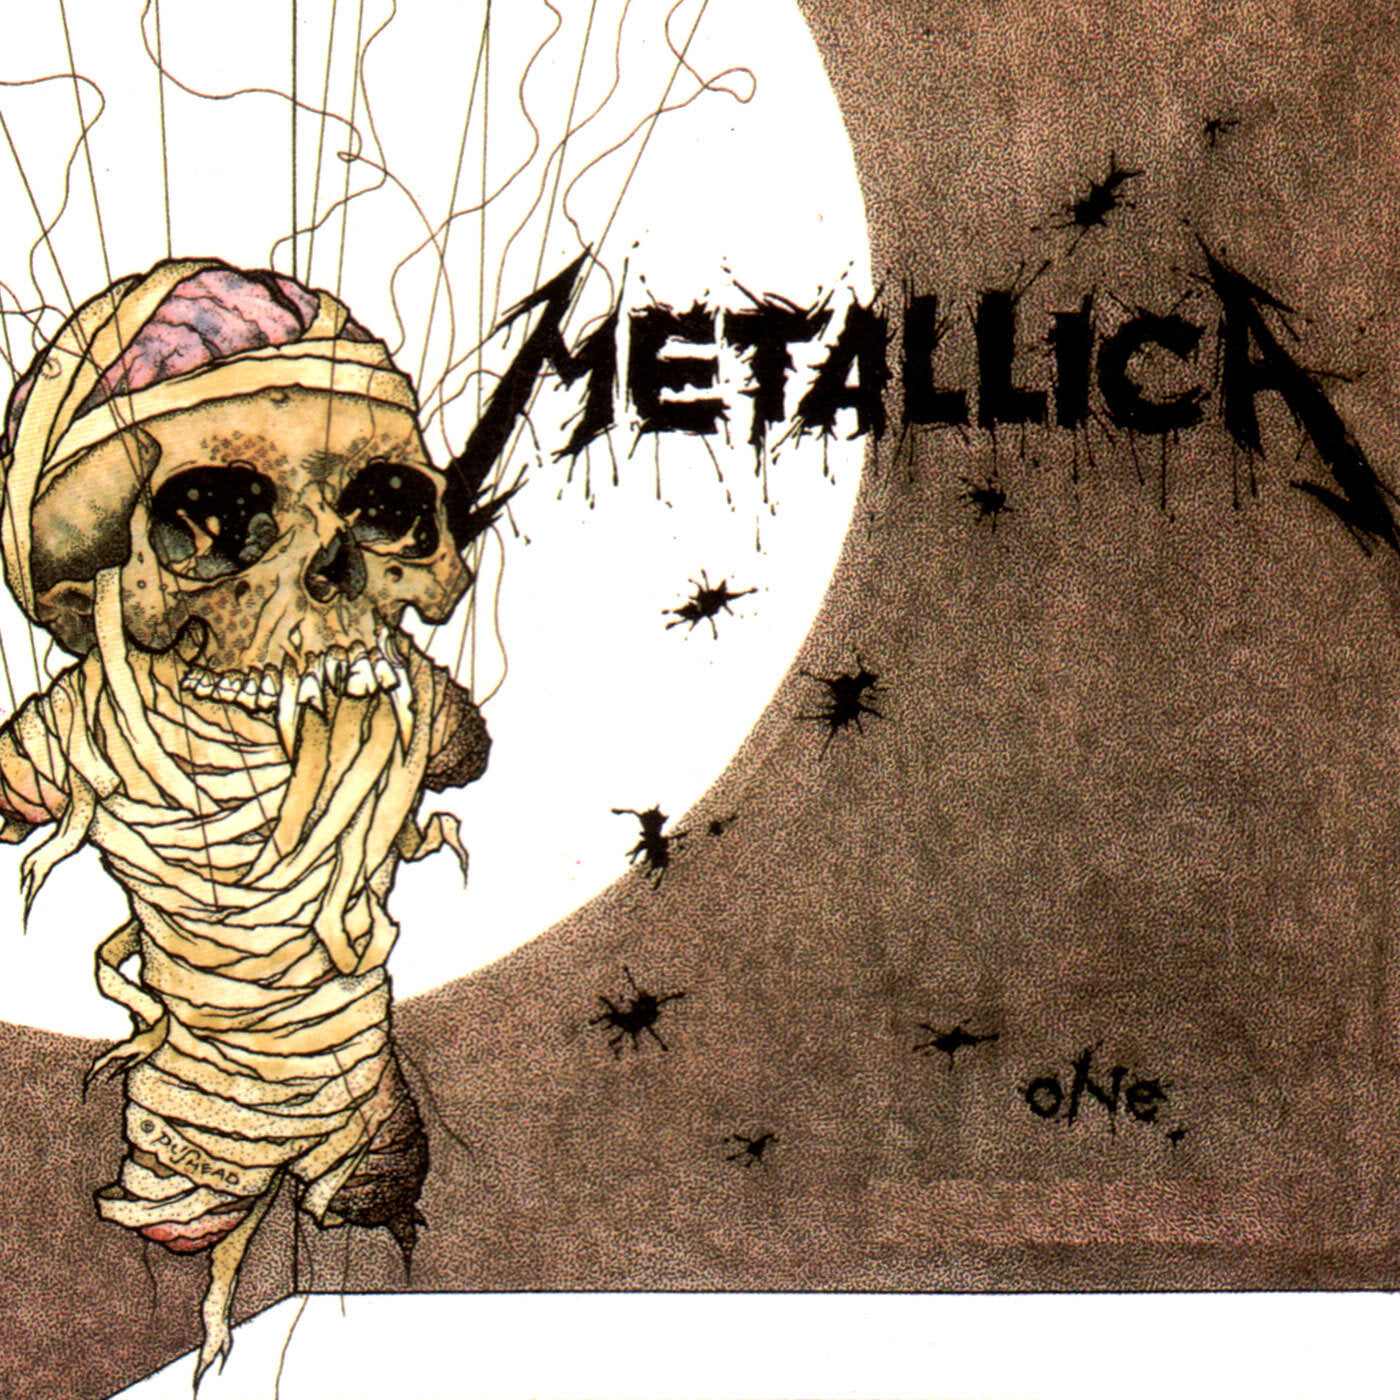 Poetry is Metal: What veterans can learn from Metallica’s “One”